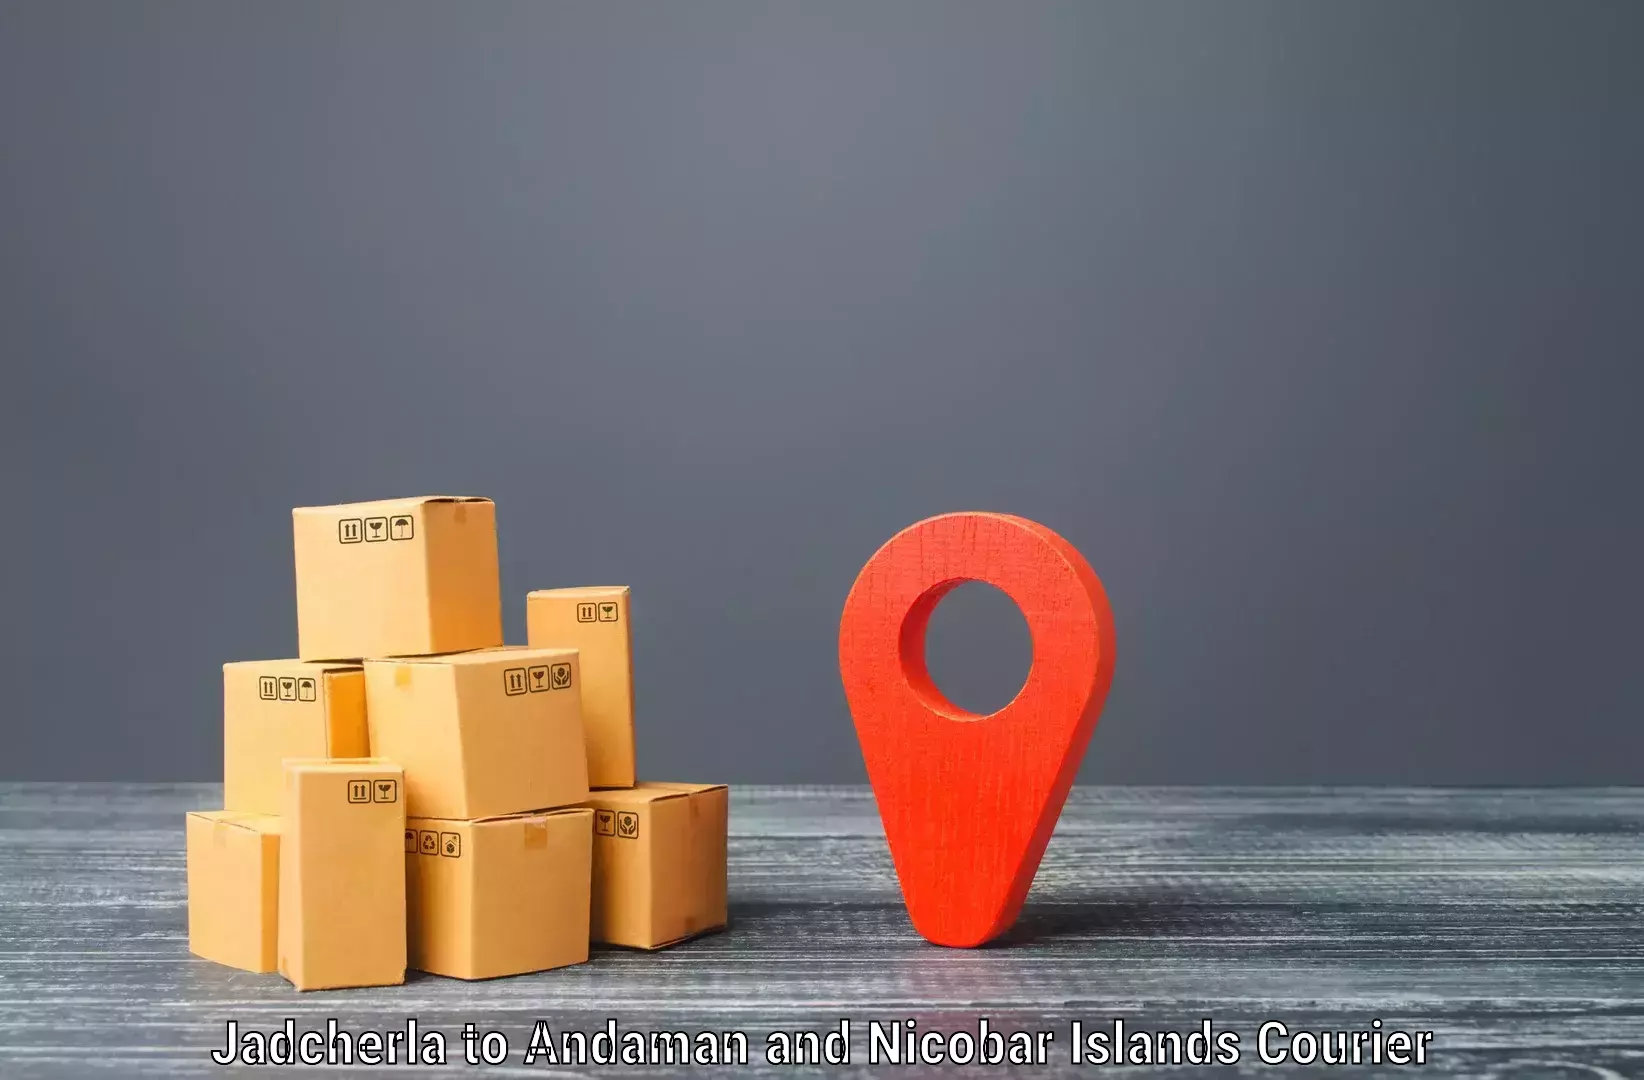 Domestic courier in Jadcherla to North And Middle Andaman